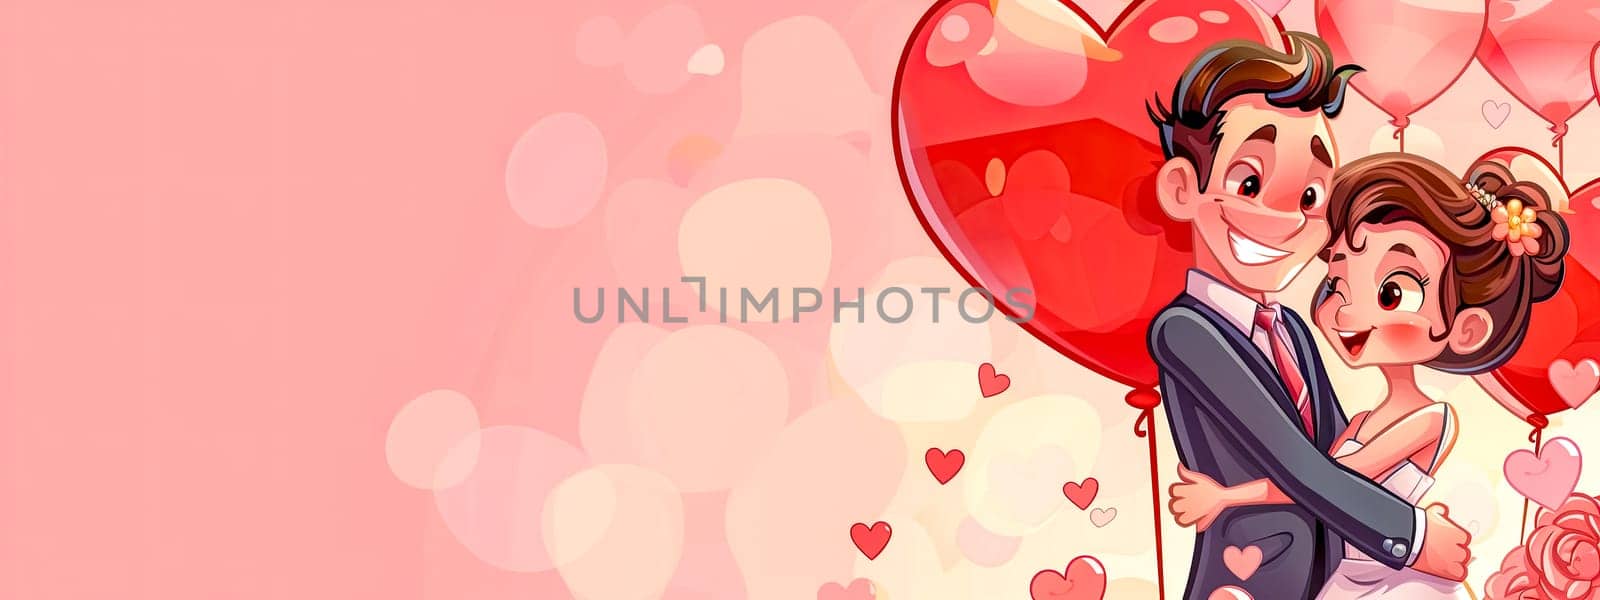 Loving Couple Embrace with Heart Balloons on Pink Background, copy space